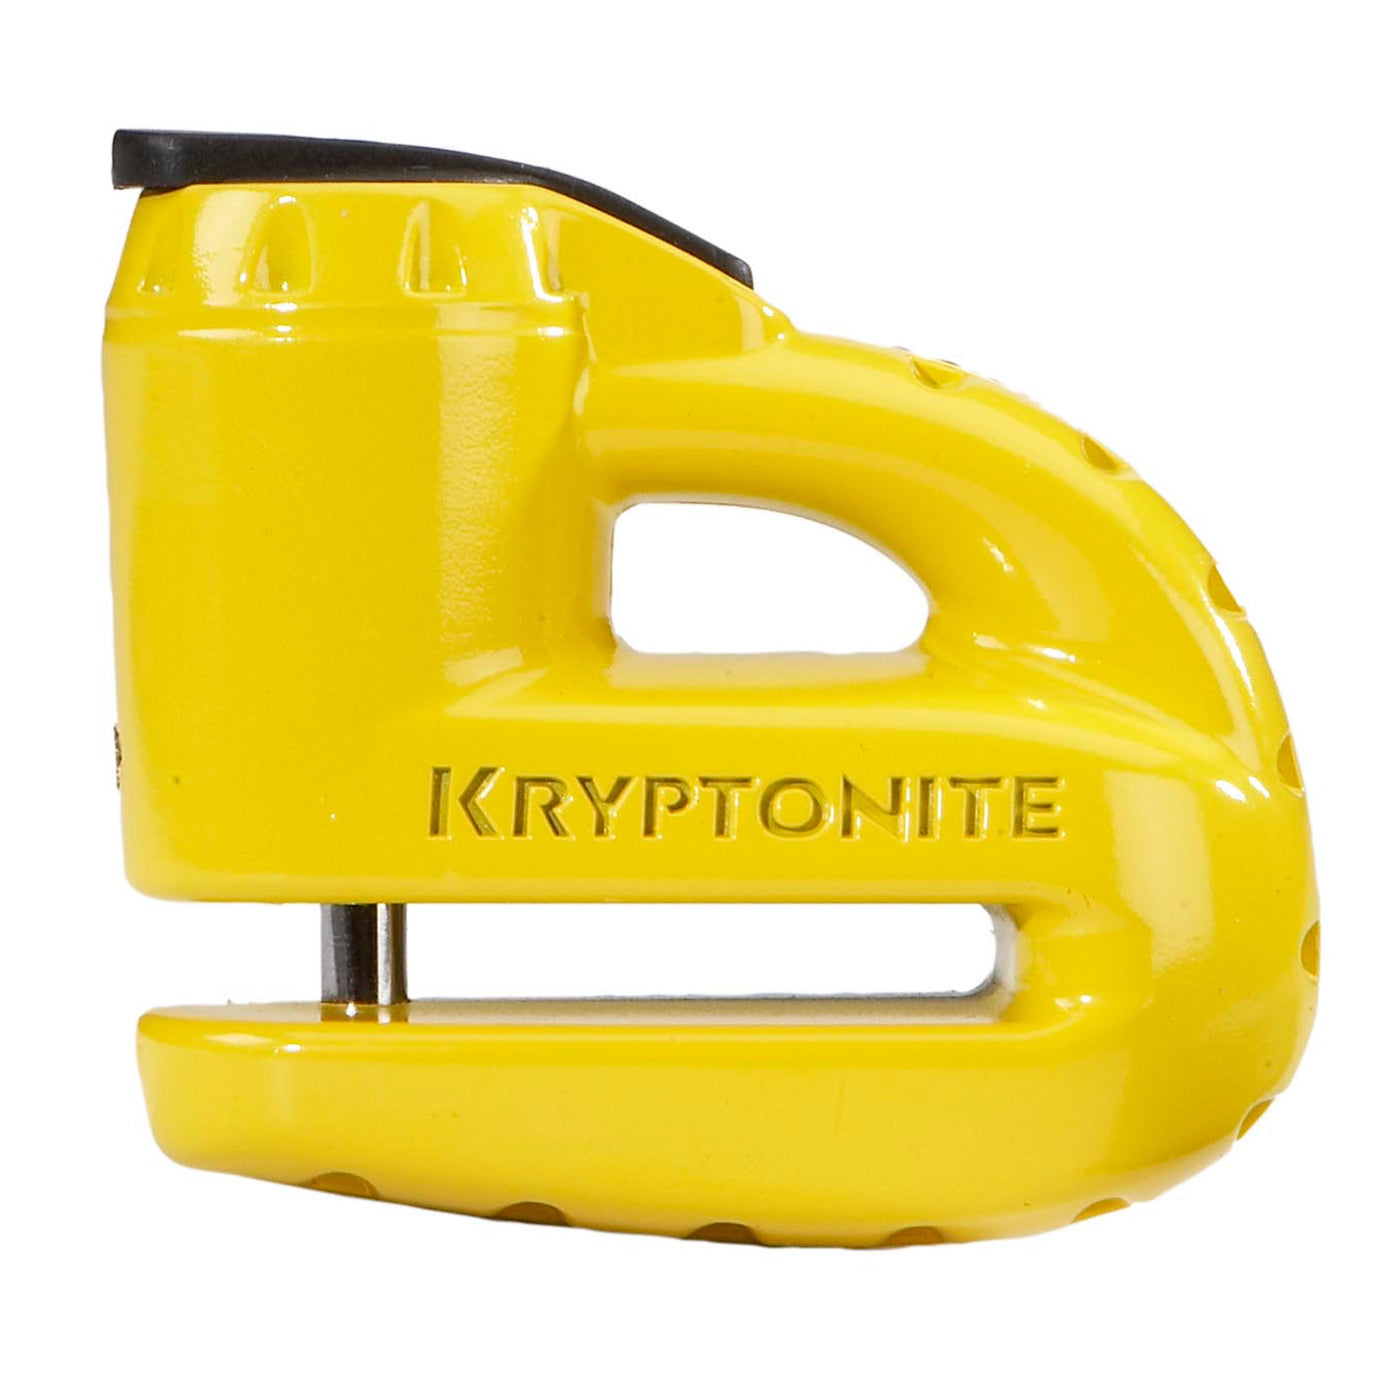 Kryptonite Keeper 5-S Disc Lock - with Reminder Cable